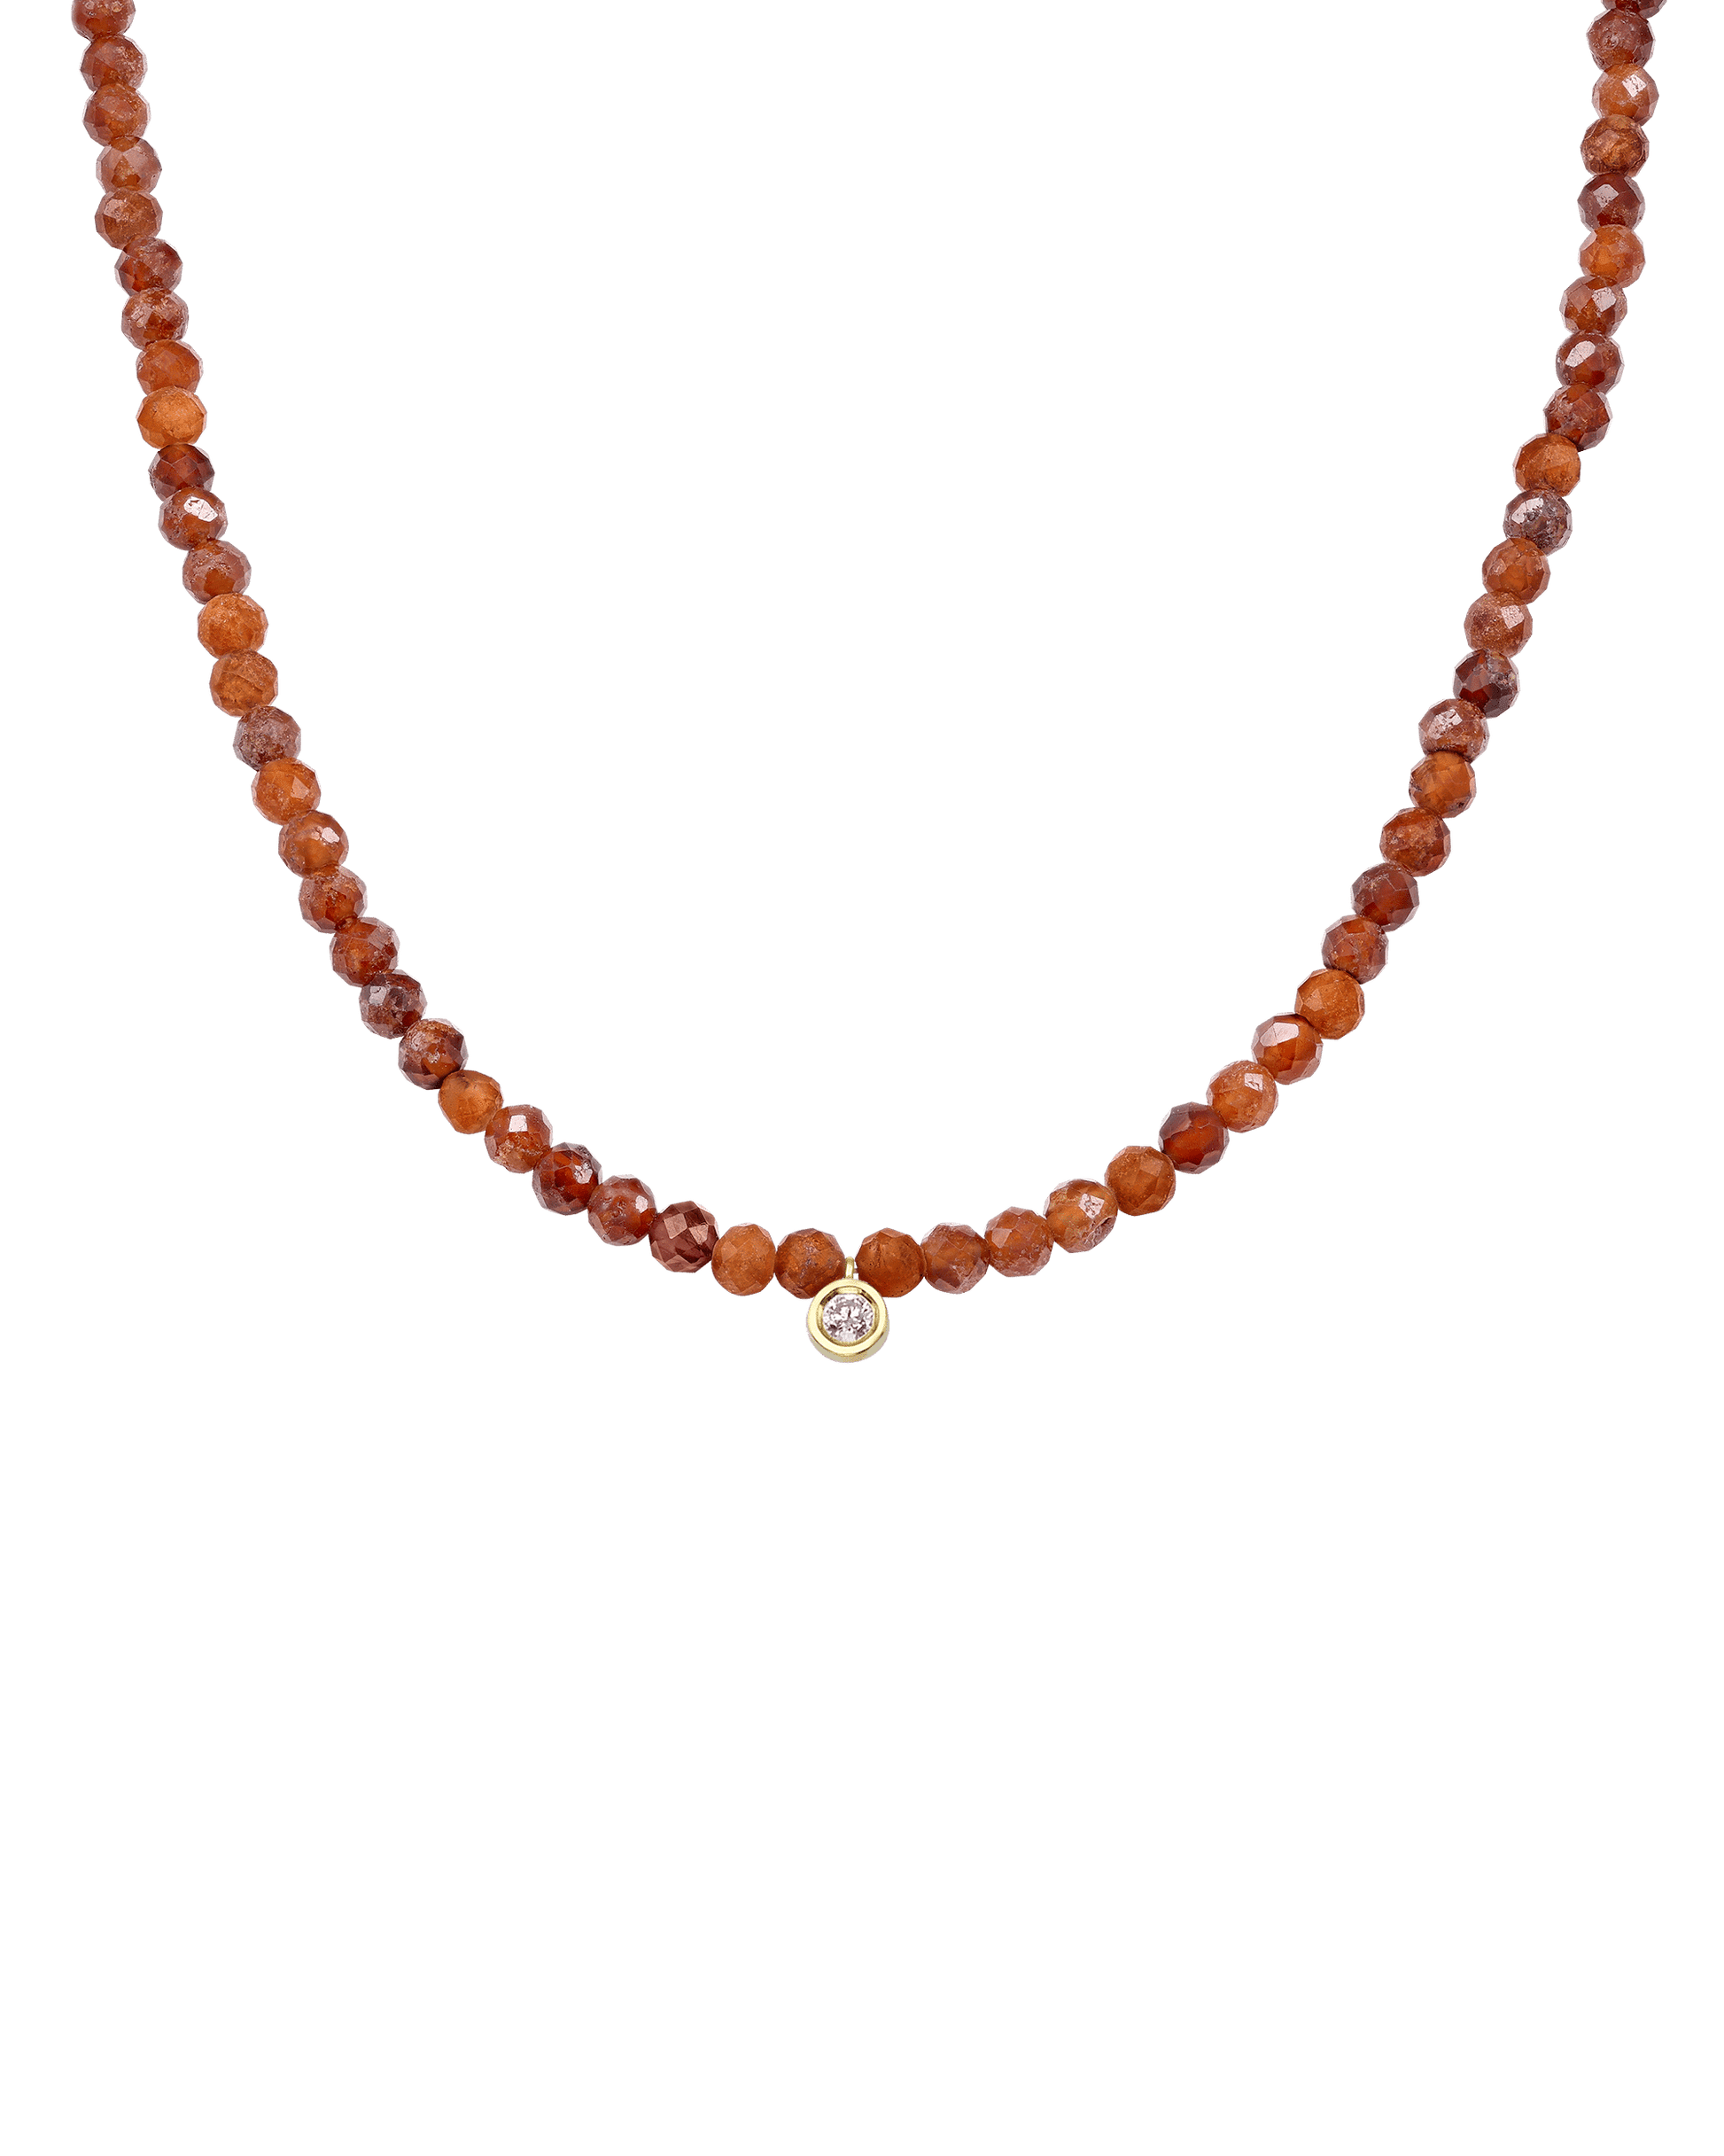 The Gemstone & Diamond Necklace - 14K Yellow Gold Necklaces 14K Solid Gold Natural Garnet Medium: 0.04ct 14"